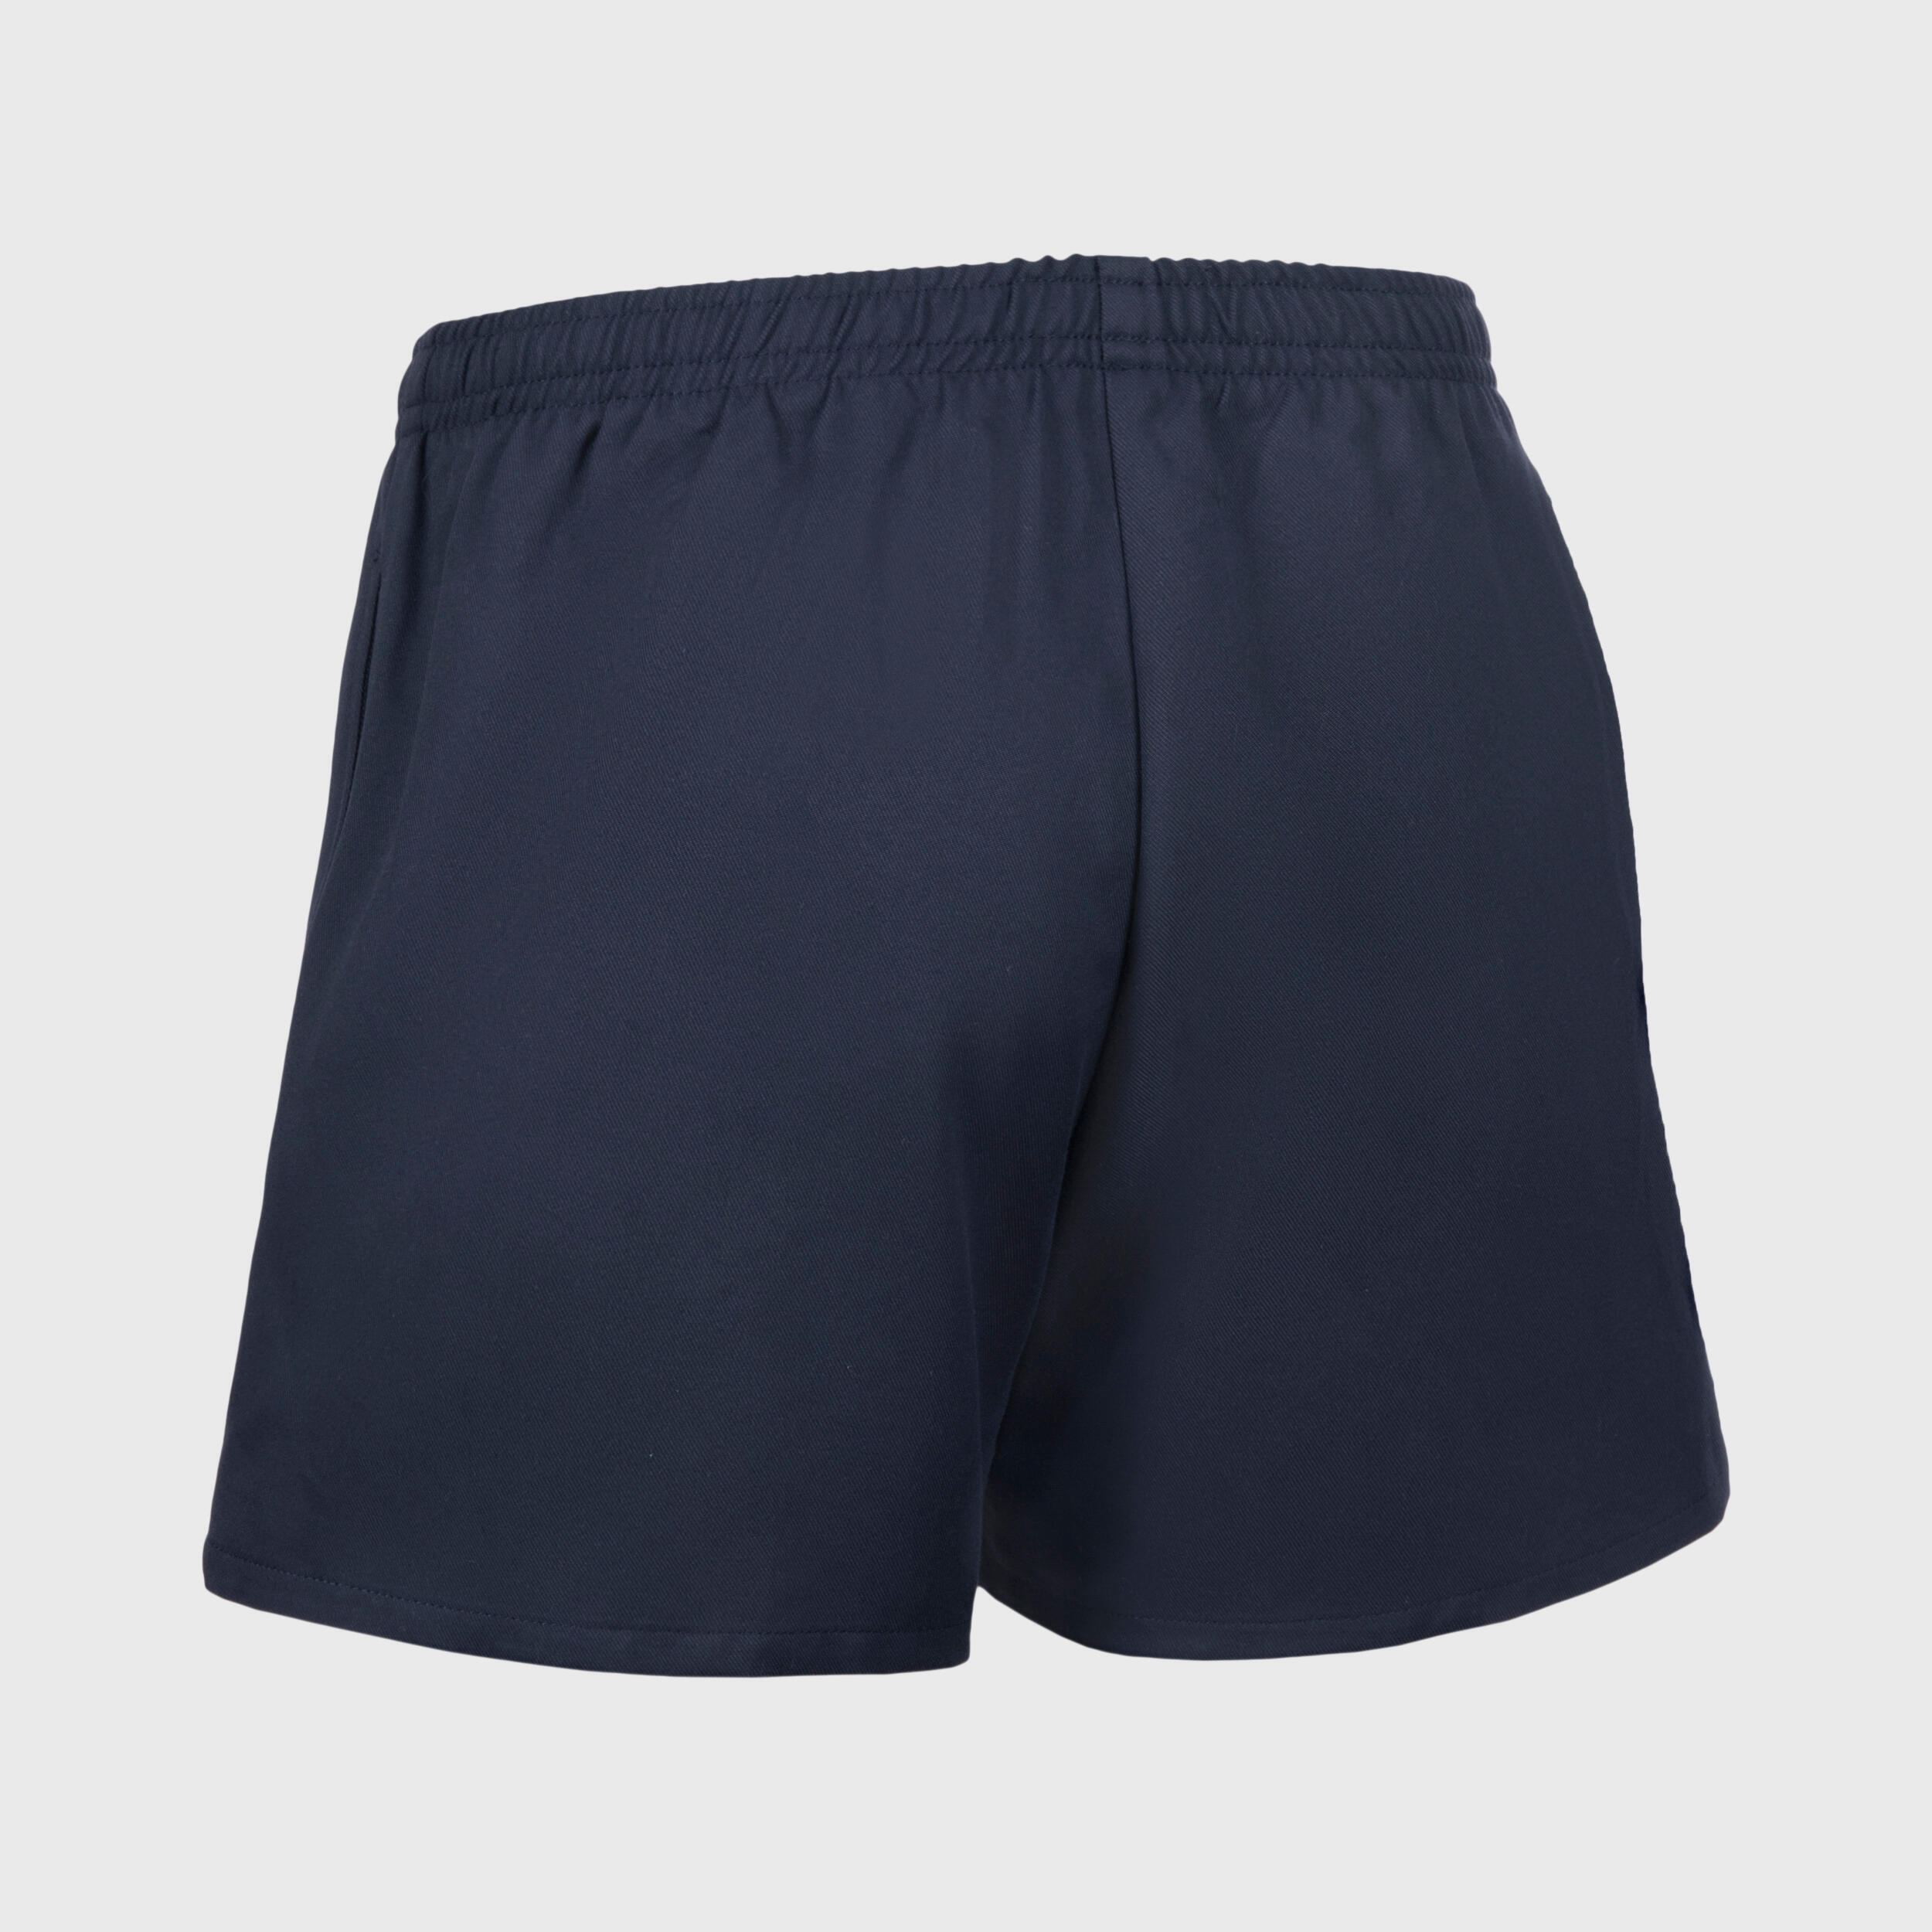 Adult Rugby Shorts with Pockets R100 - Blue 2/6